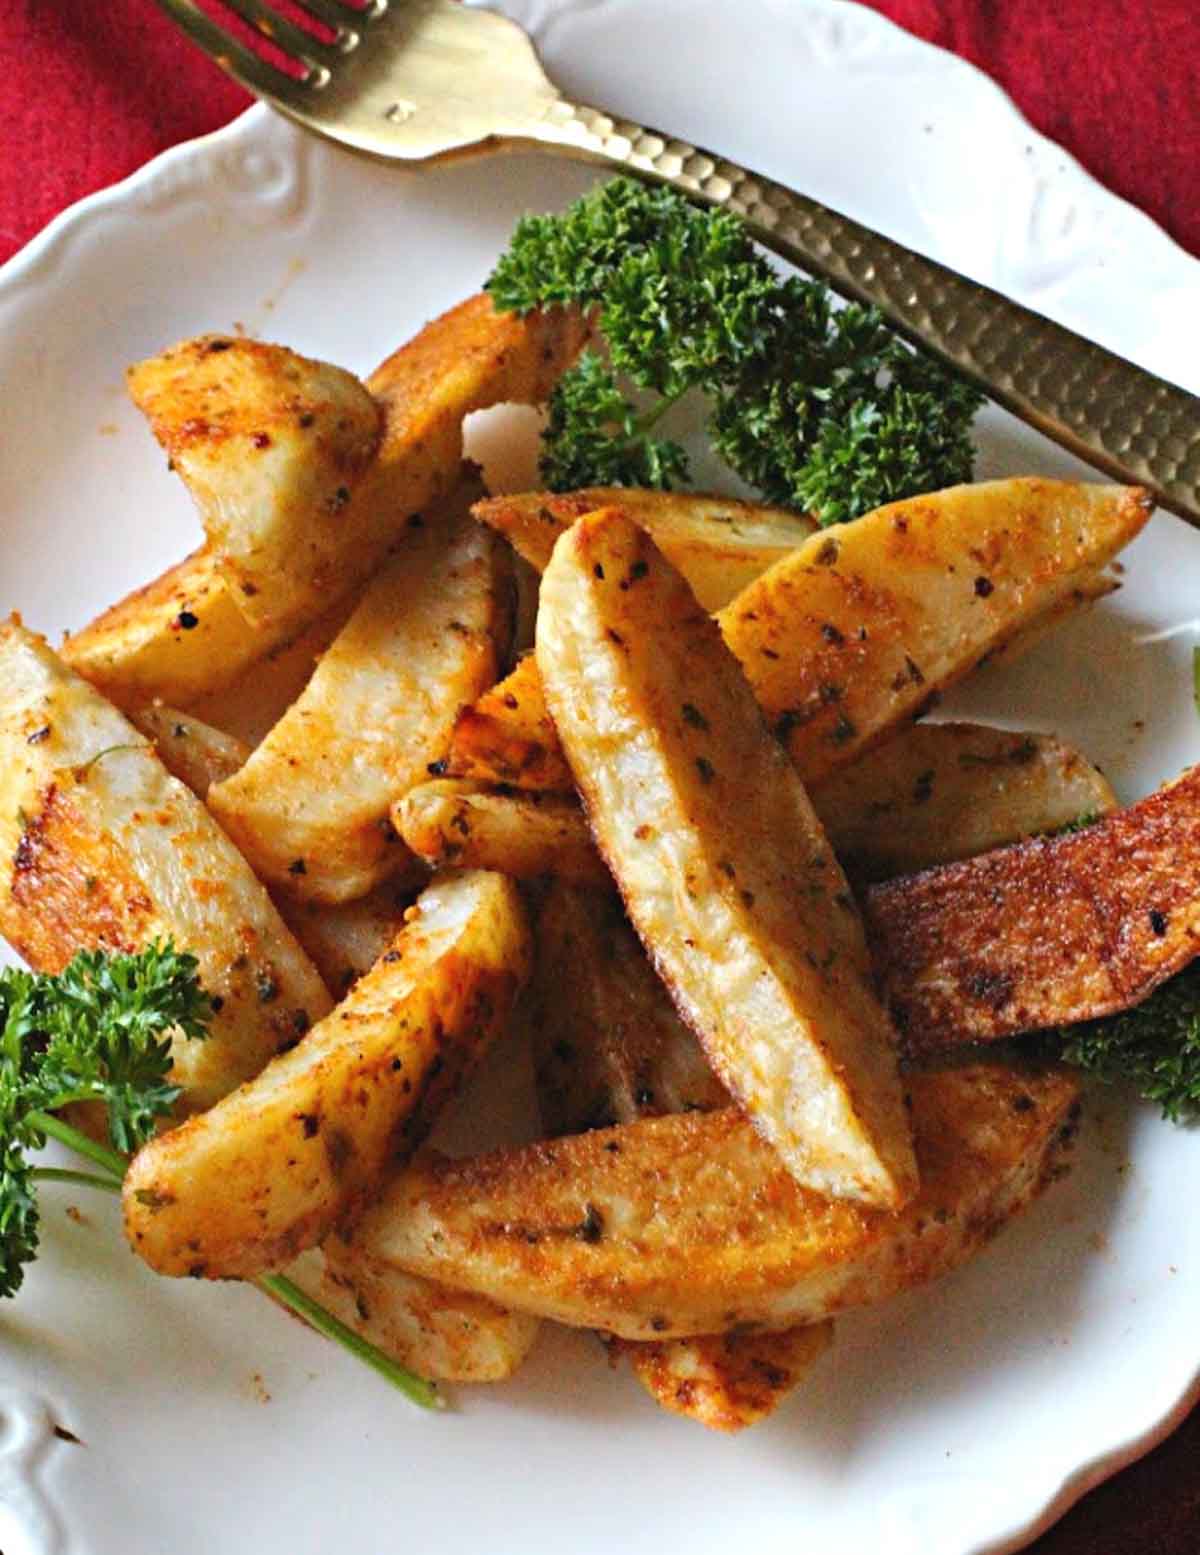 oven baked steak fries seasoned with paprika and garnished with parsley